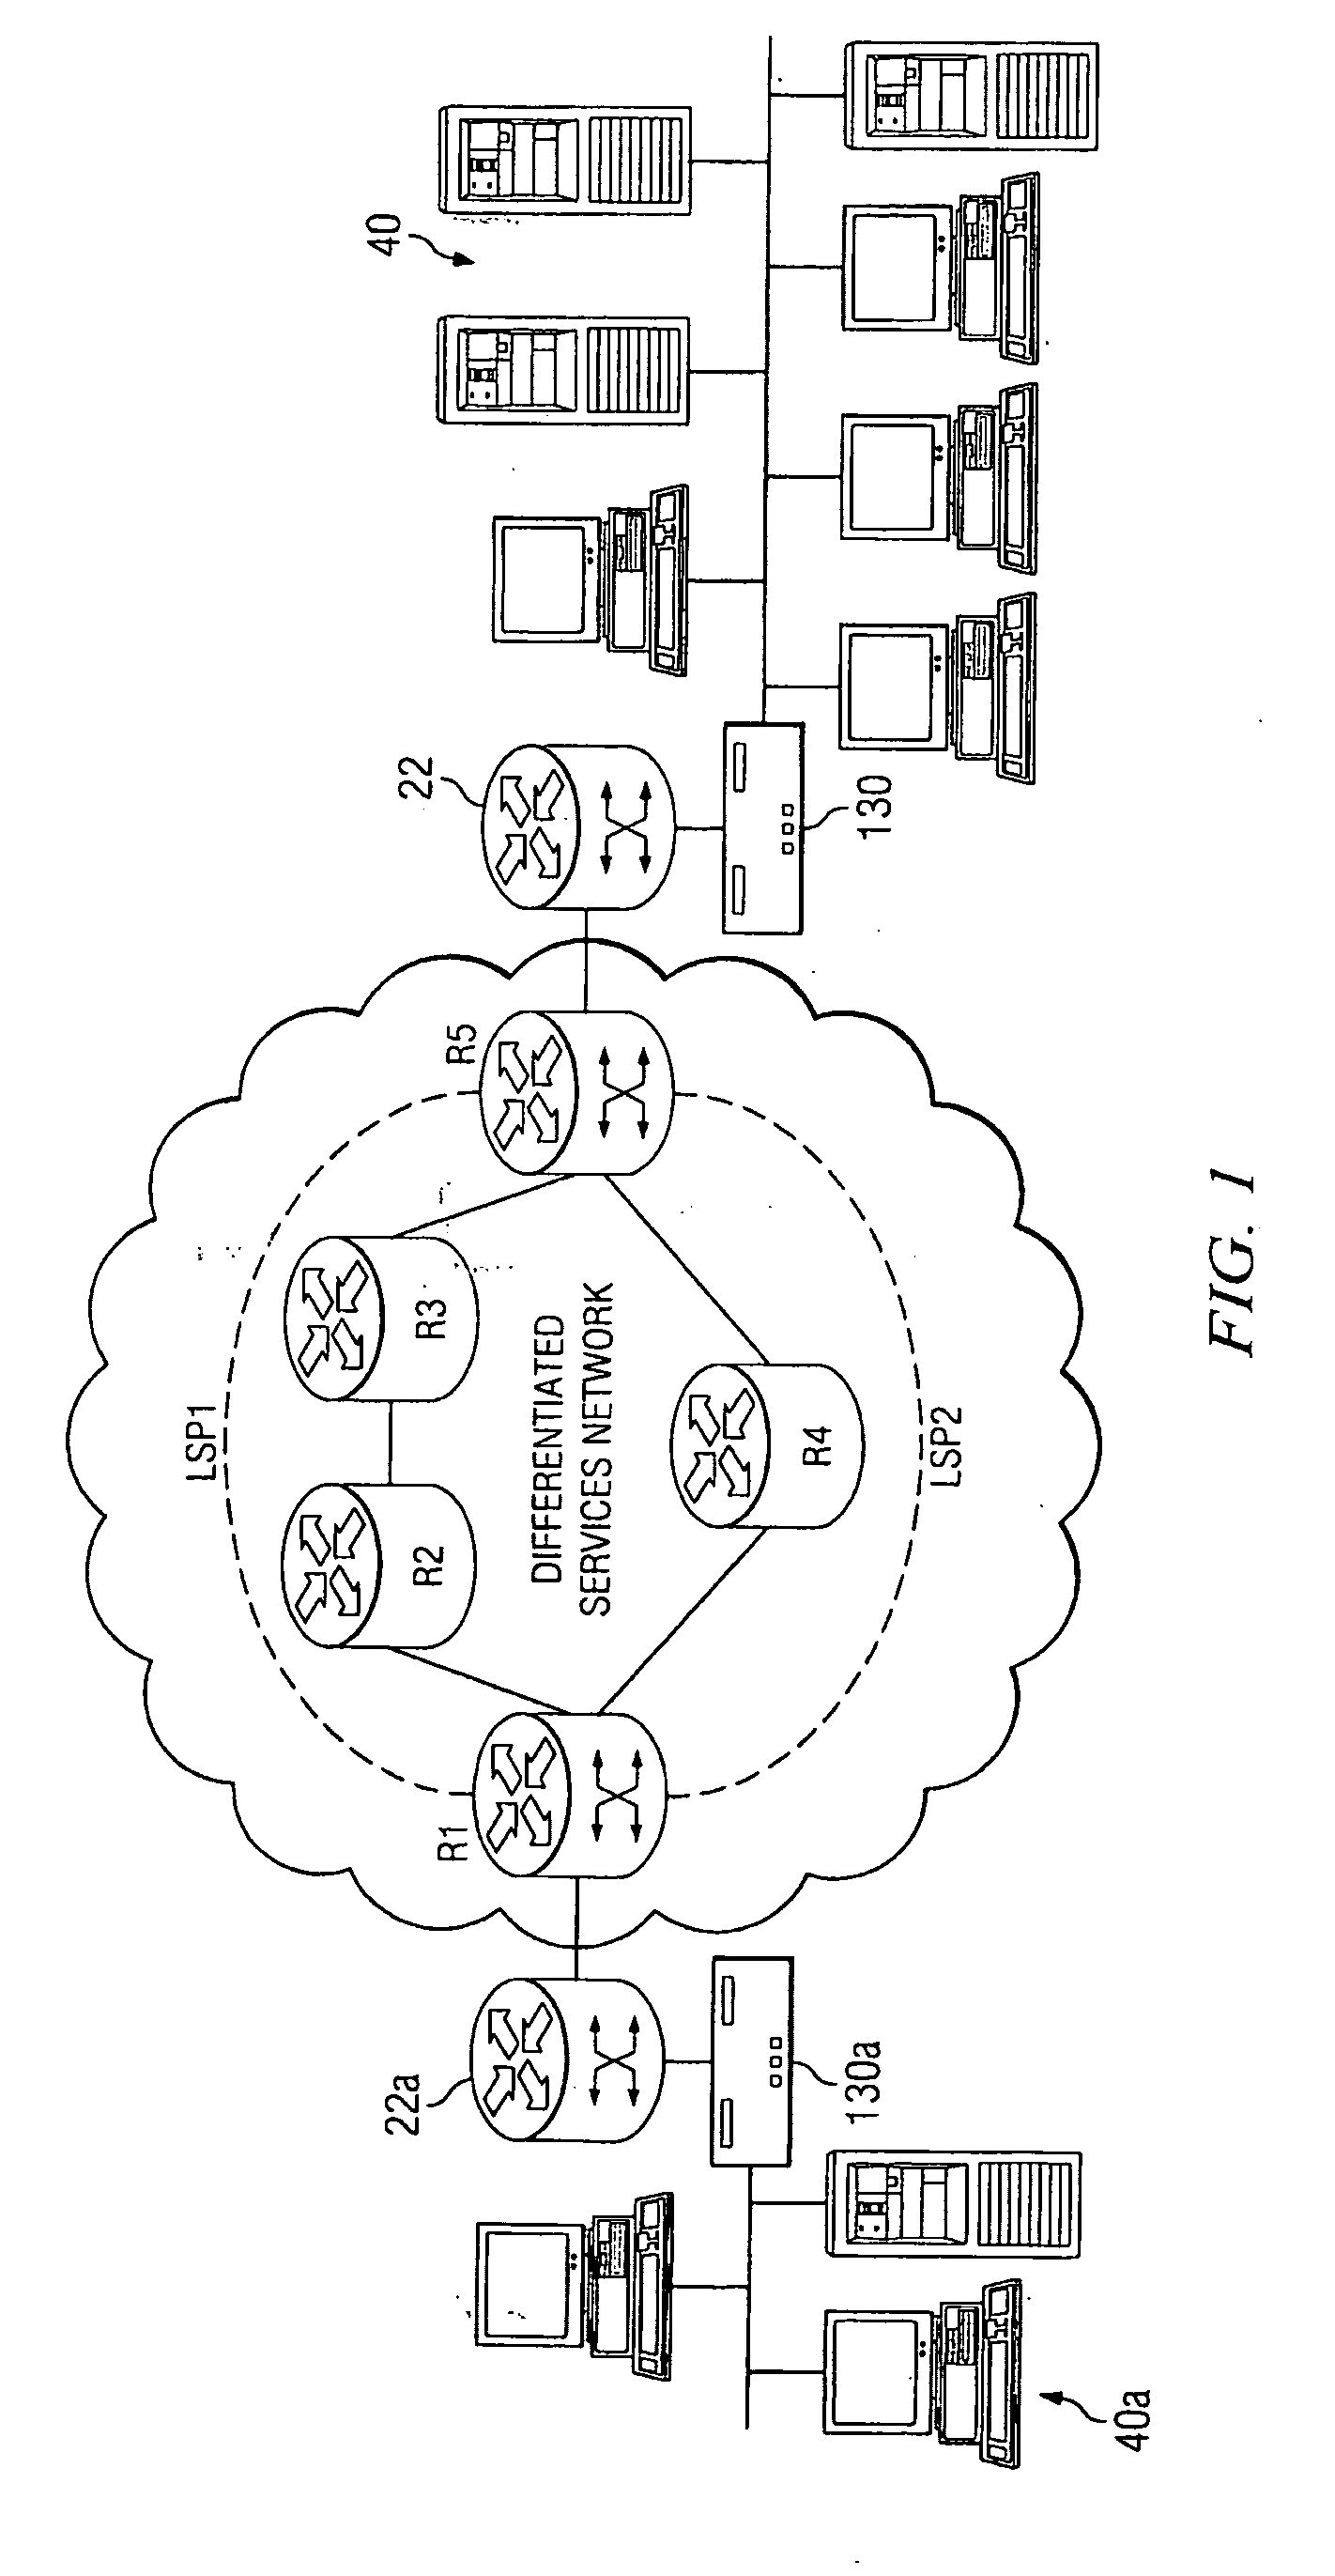 Adaptive, Application-Aware Selection of Differentiated Network Services